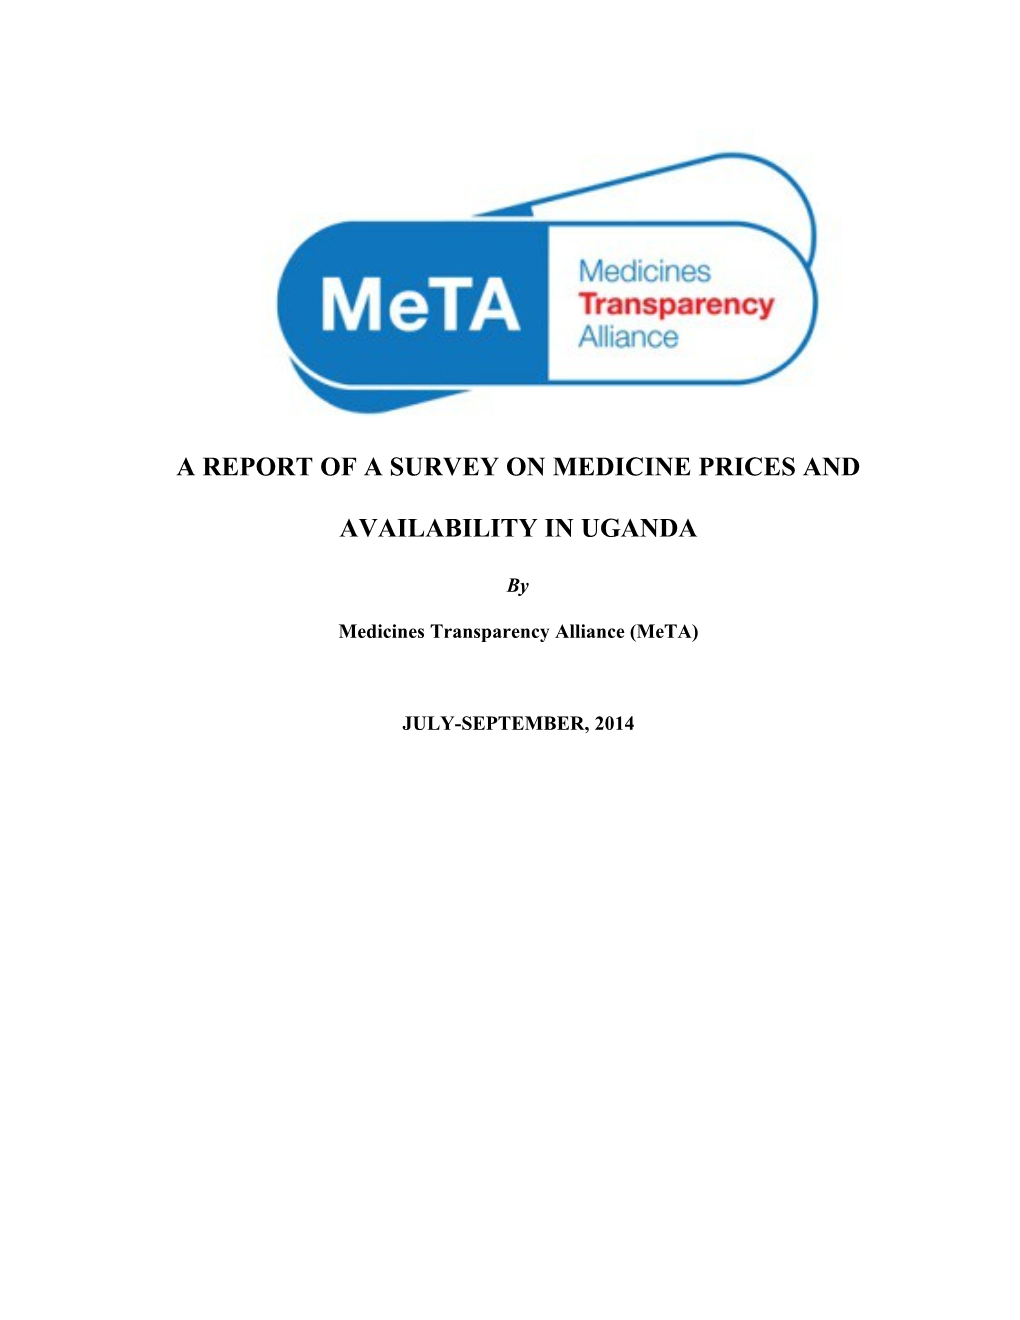 A Report of a Survey on Medicine Prices and Availability in Uganda